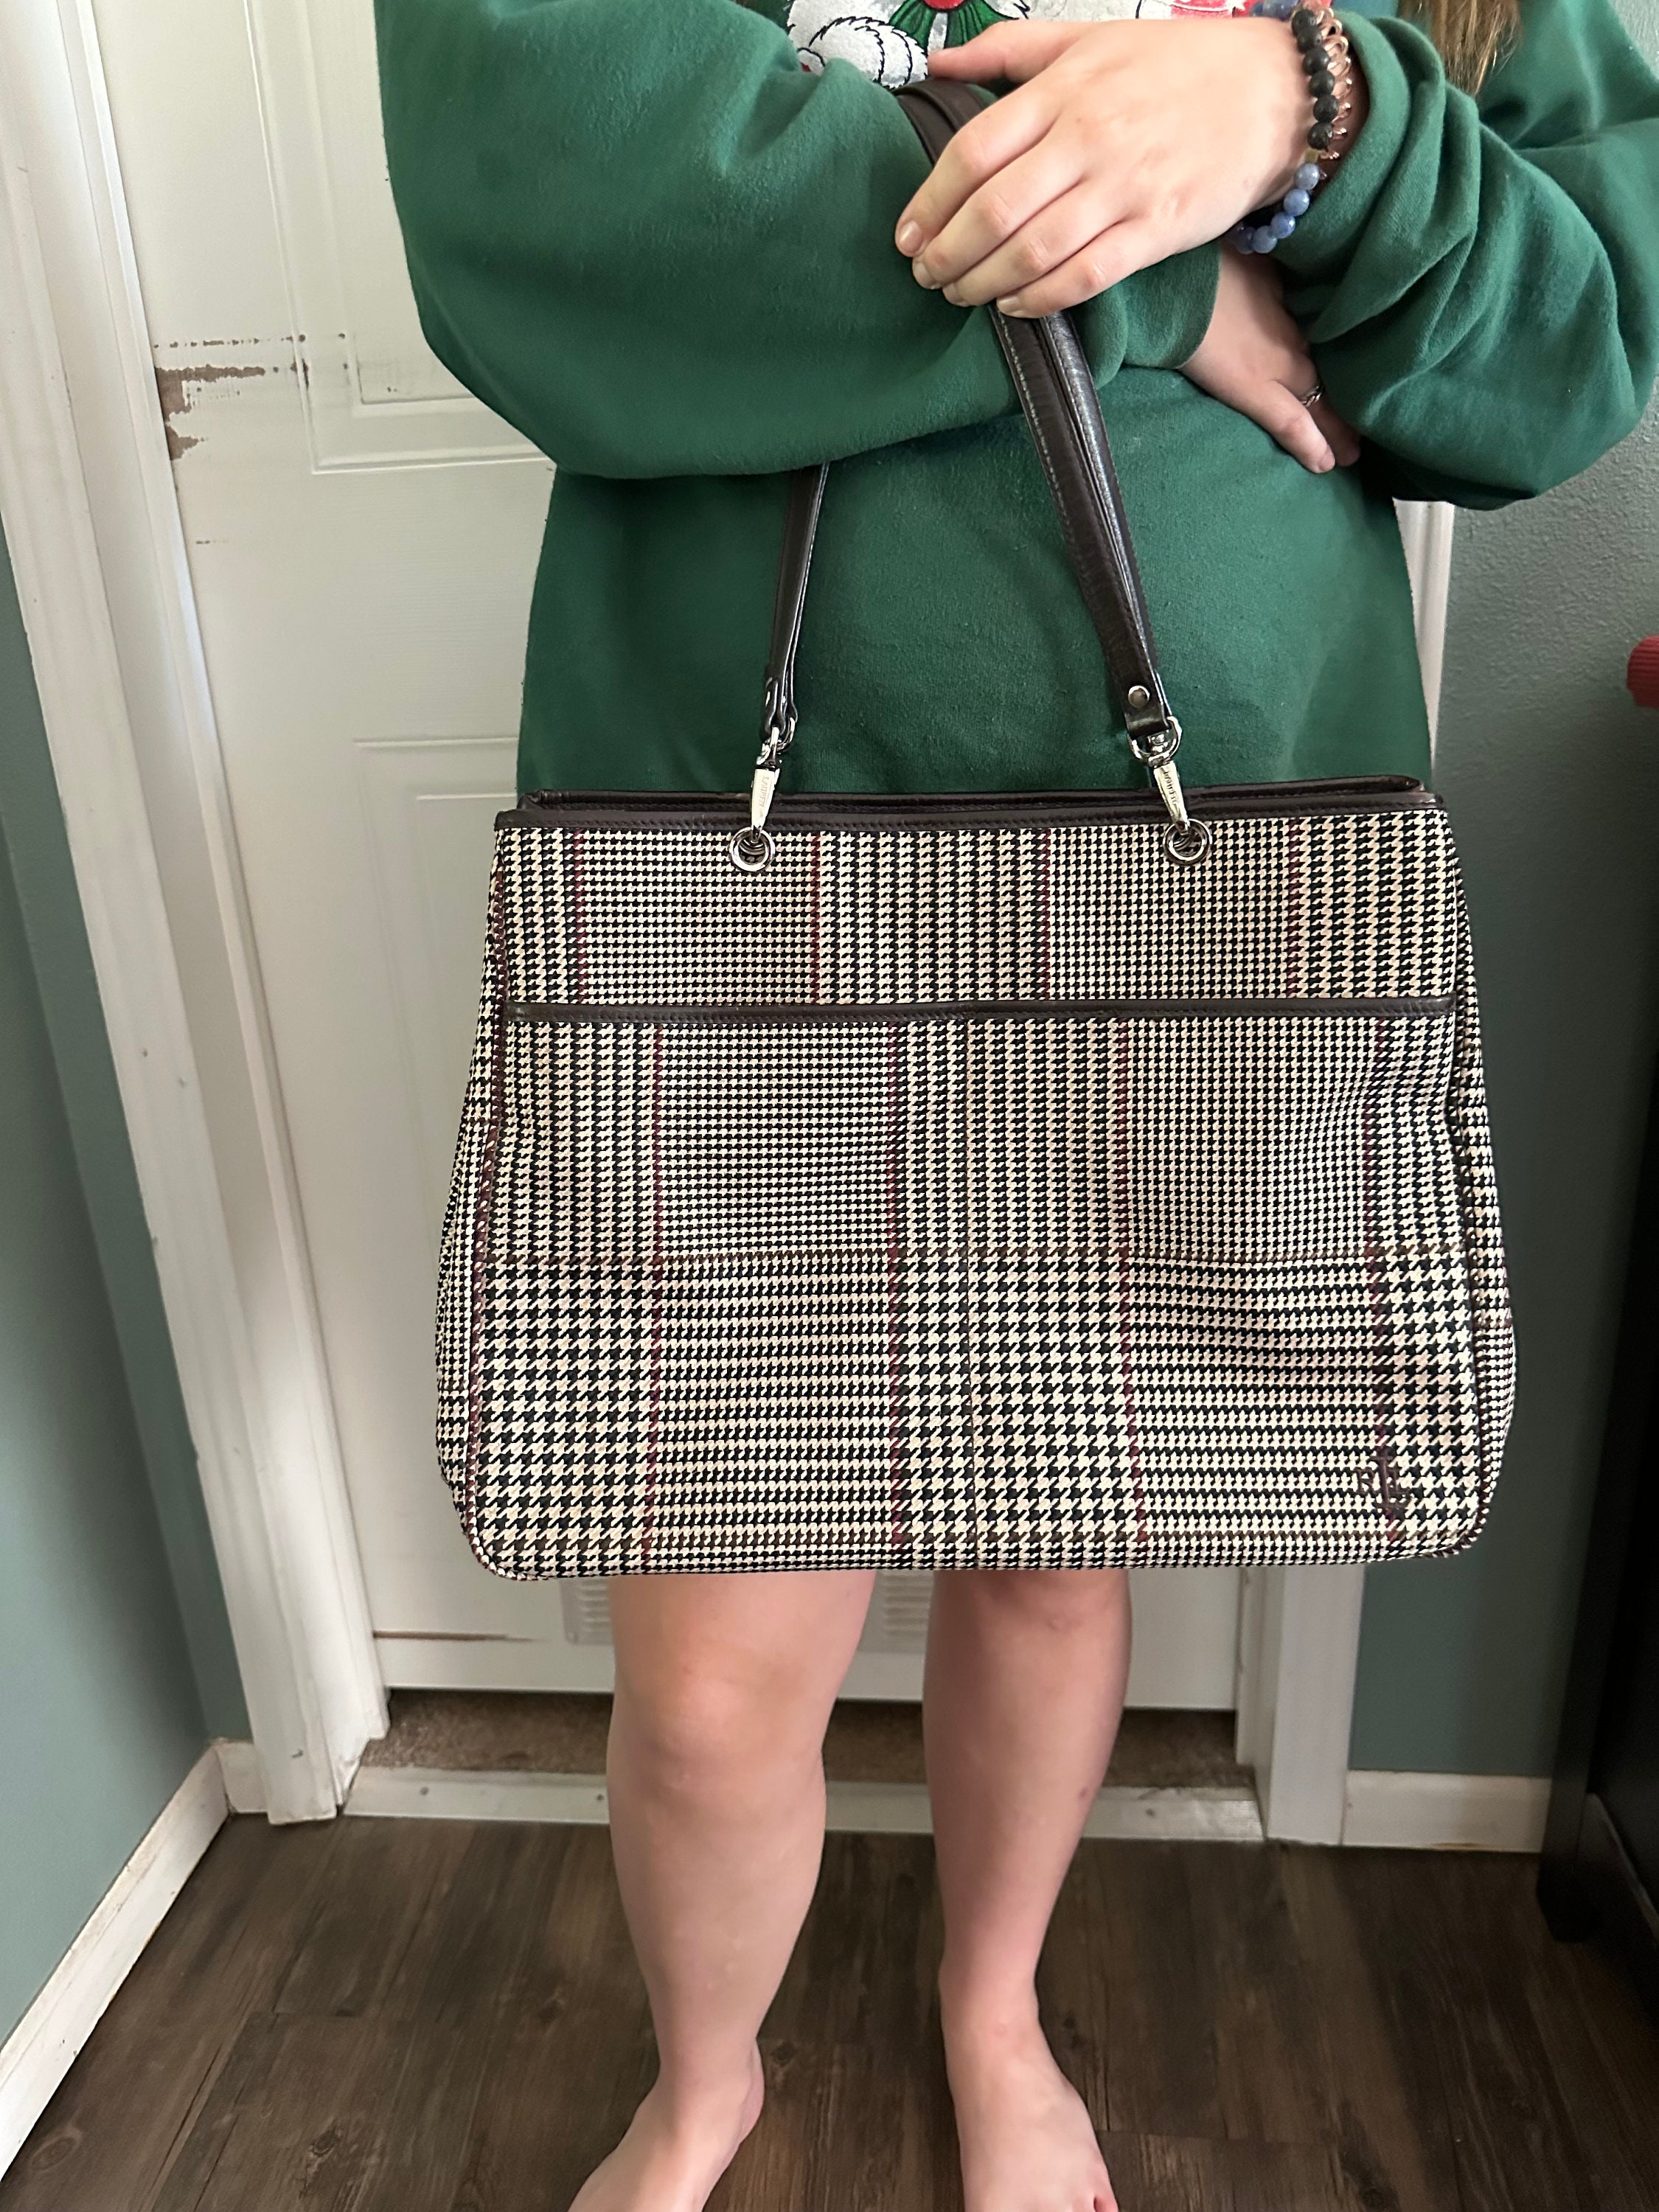 Vintage Polo Ralph Lauren Houndstooth Coated Canvas Leather Tote Bag Purse